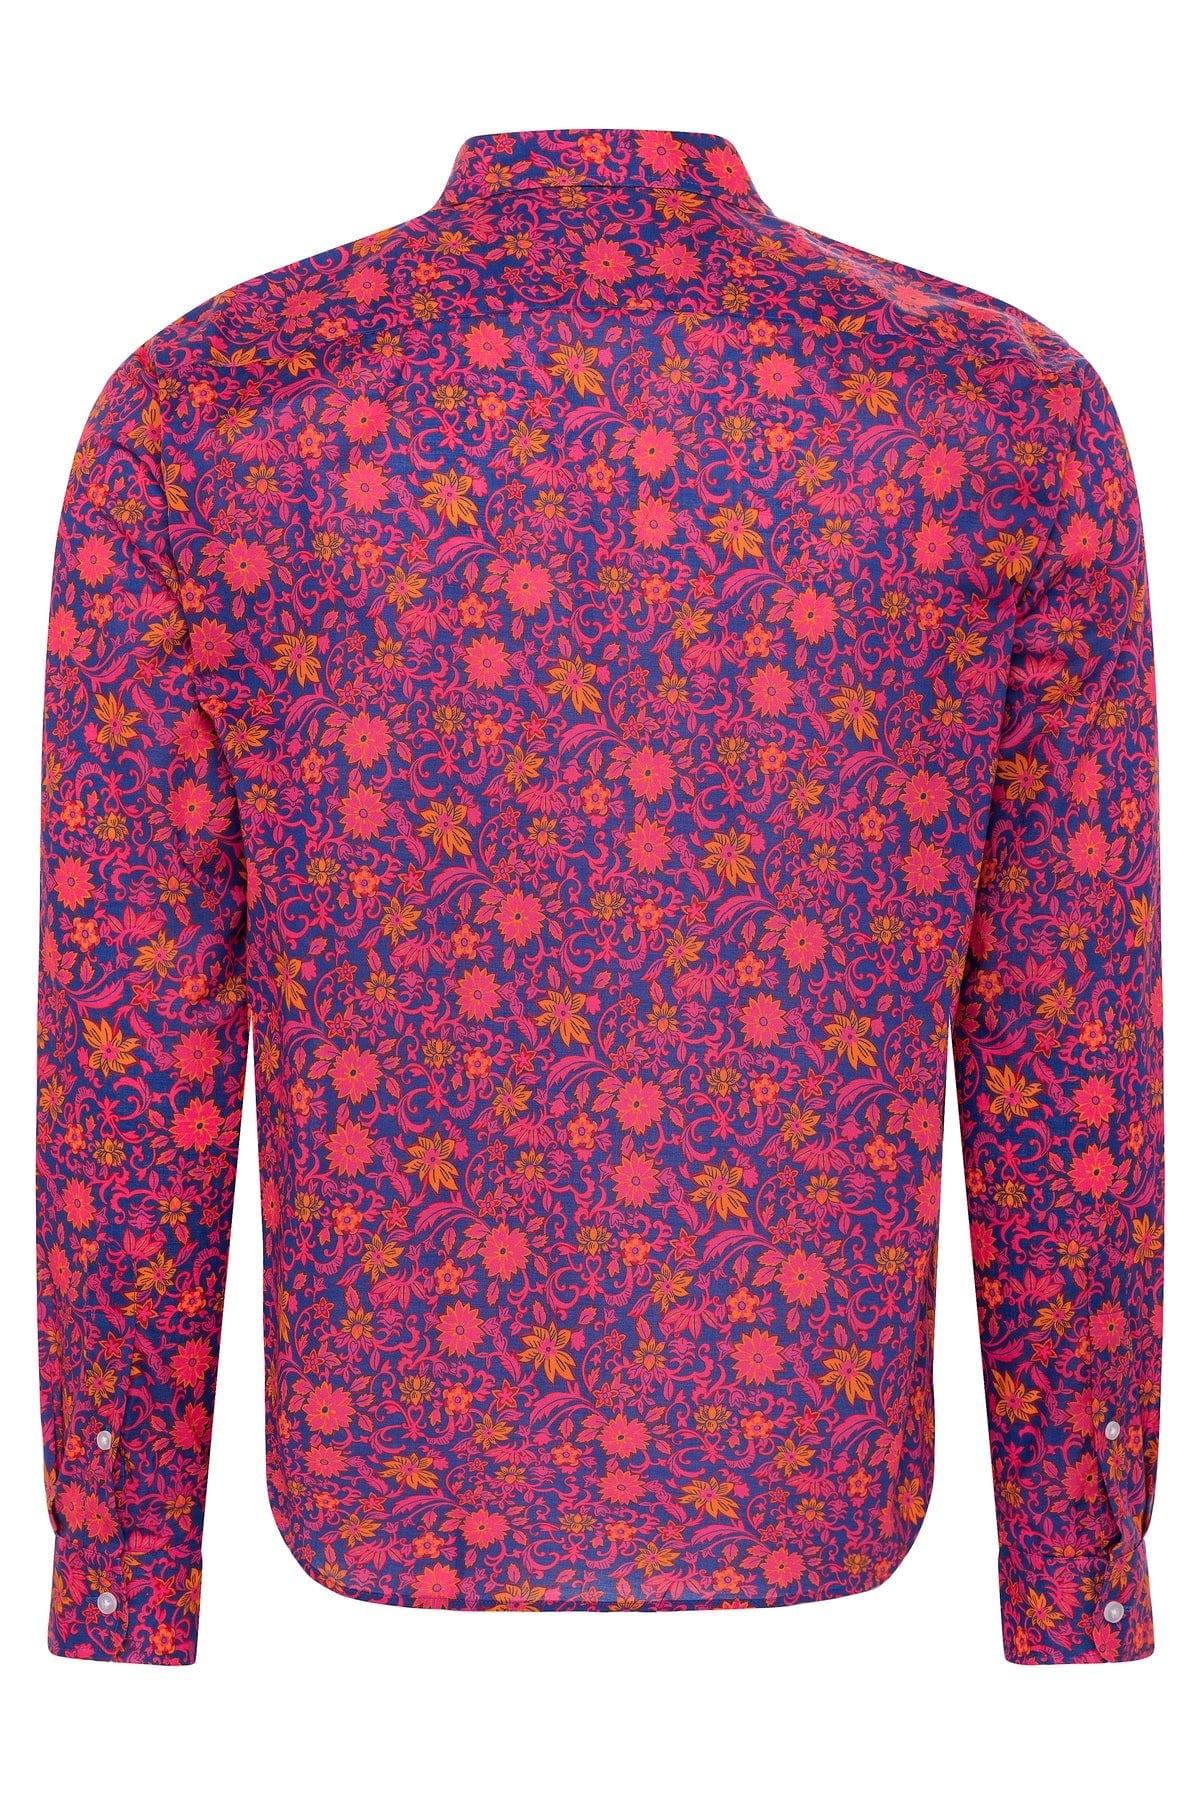 Le Club Apparel & Accessories > Clothing > Shirts & Tops Floral Print Le Club Royale Long Sleeve Shirt 2022 Floral Print Le Club Long Sleeve Raven Shirt